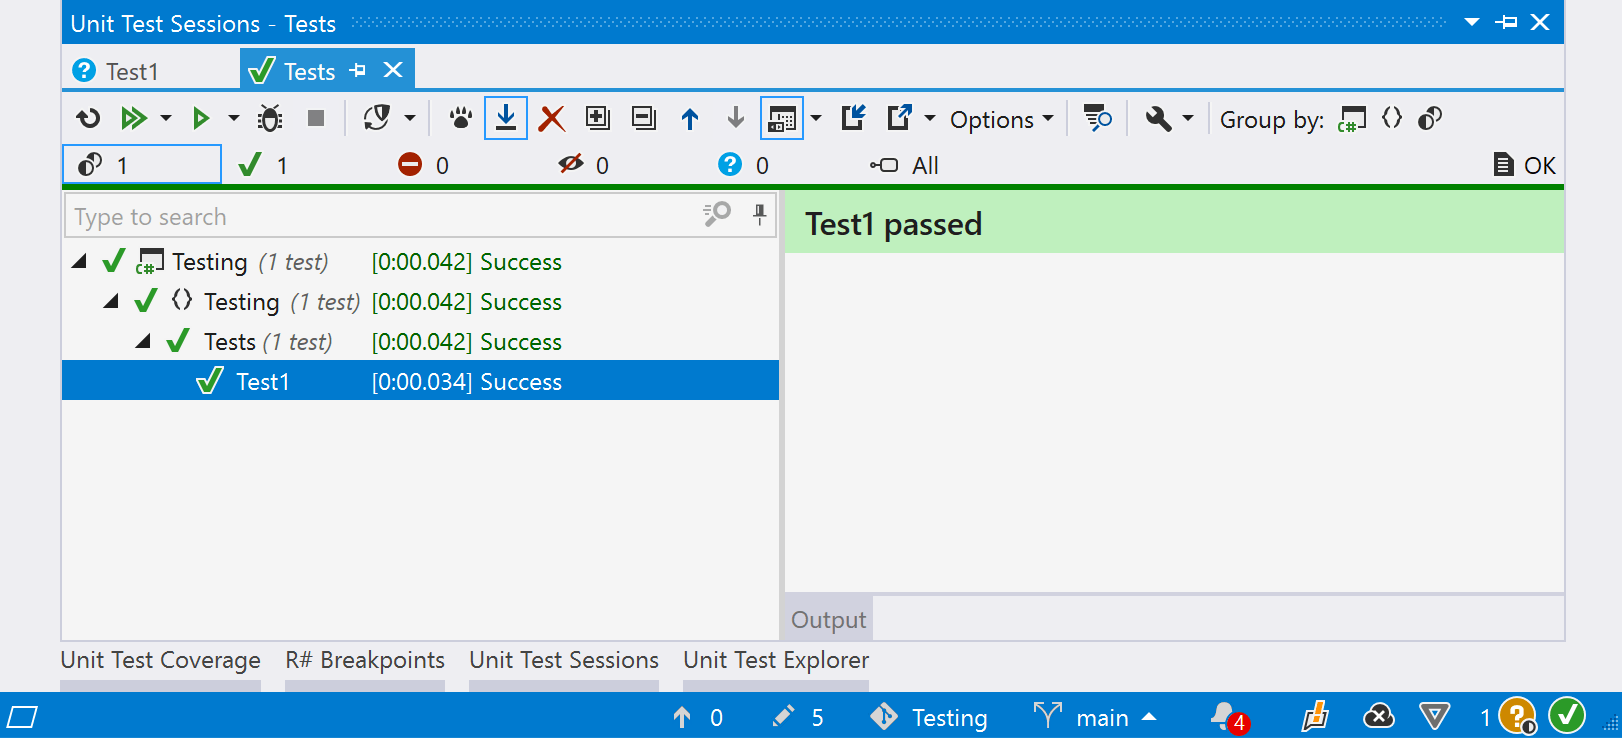 Running unit tests with resharper and visual studio